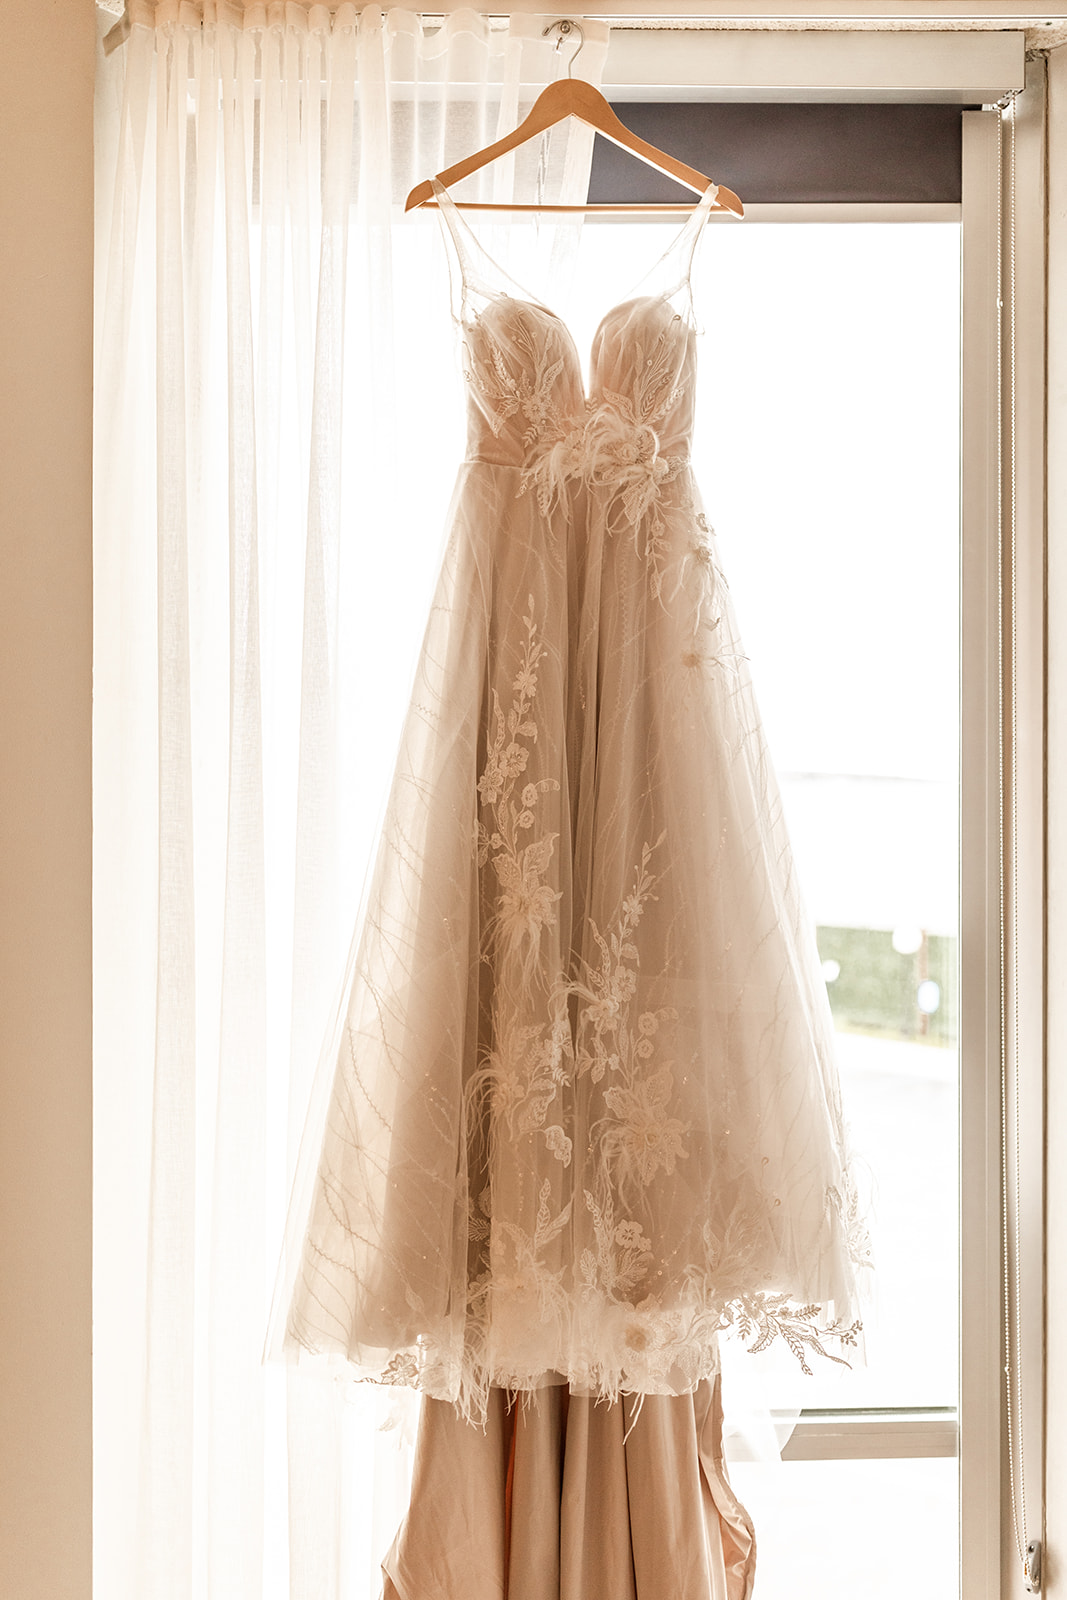 wedding dress hanging up in front of window